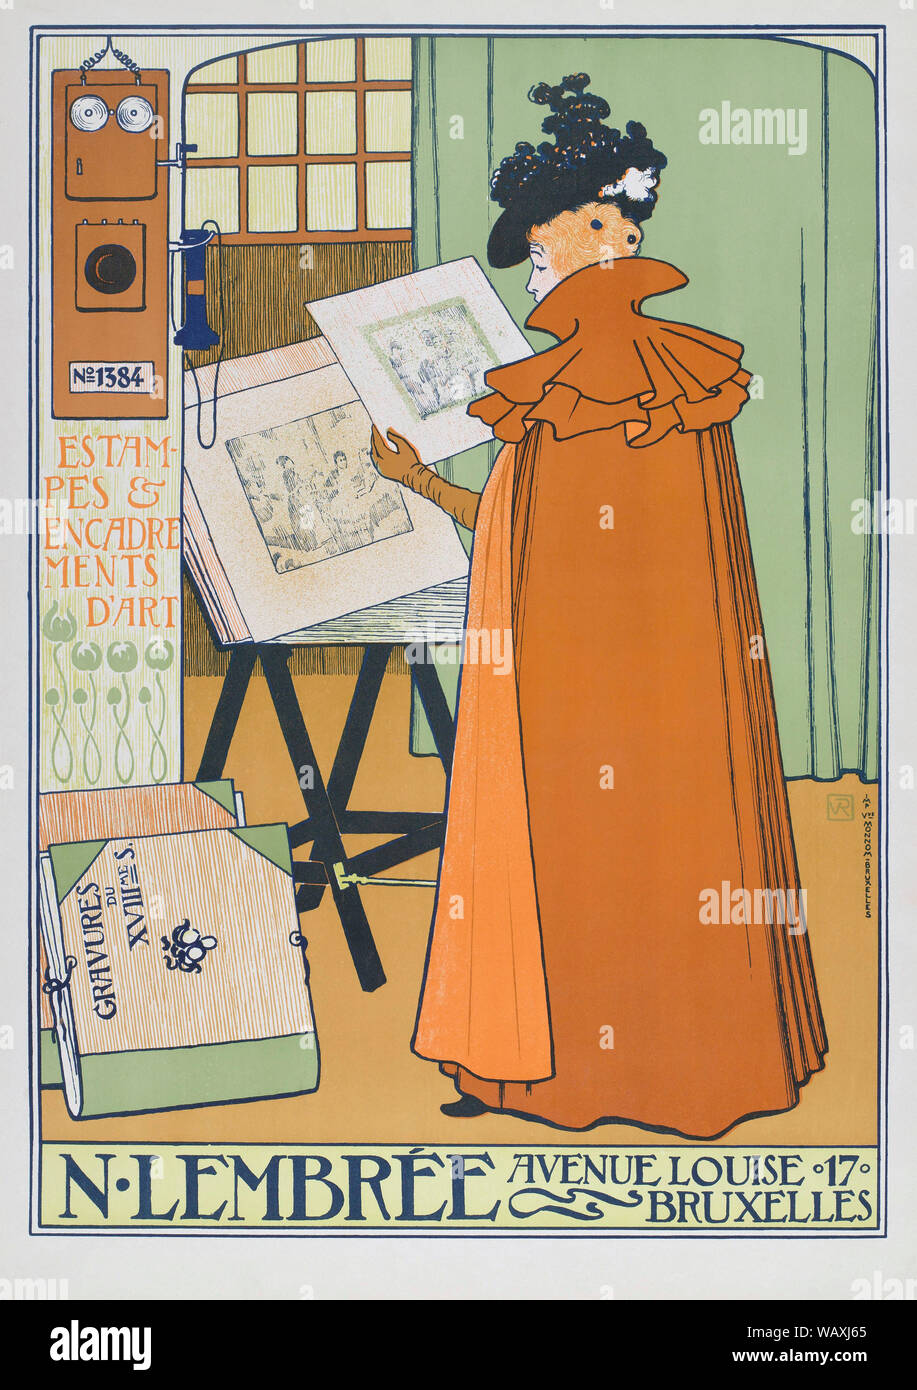 Poster dating from 1897 advertising the art and framing shop of N. Lembrée in Brussels.  Designed by Belgium artist Theo Van Rysselberghe, 1862-1926. Stock Photo